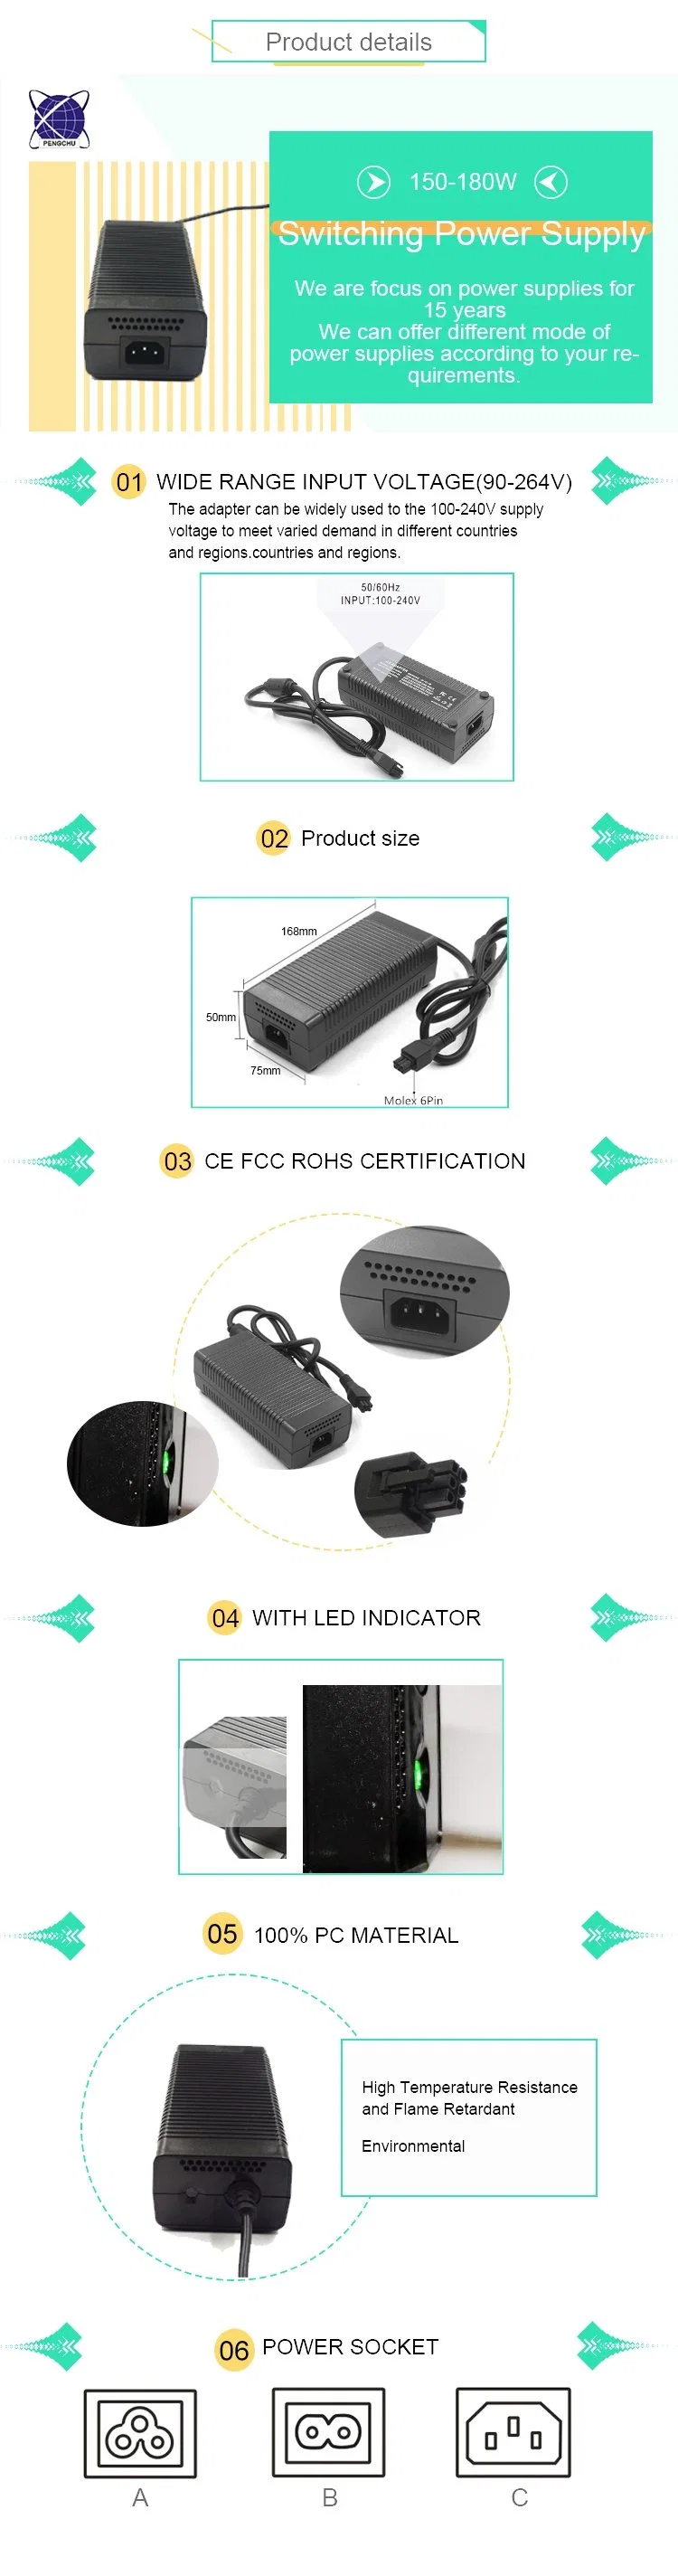 100% Plastic Material SMPS 180W AC/DC Adapter 12V 15A for CCTV Camera